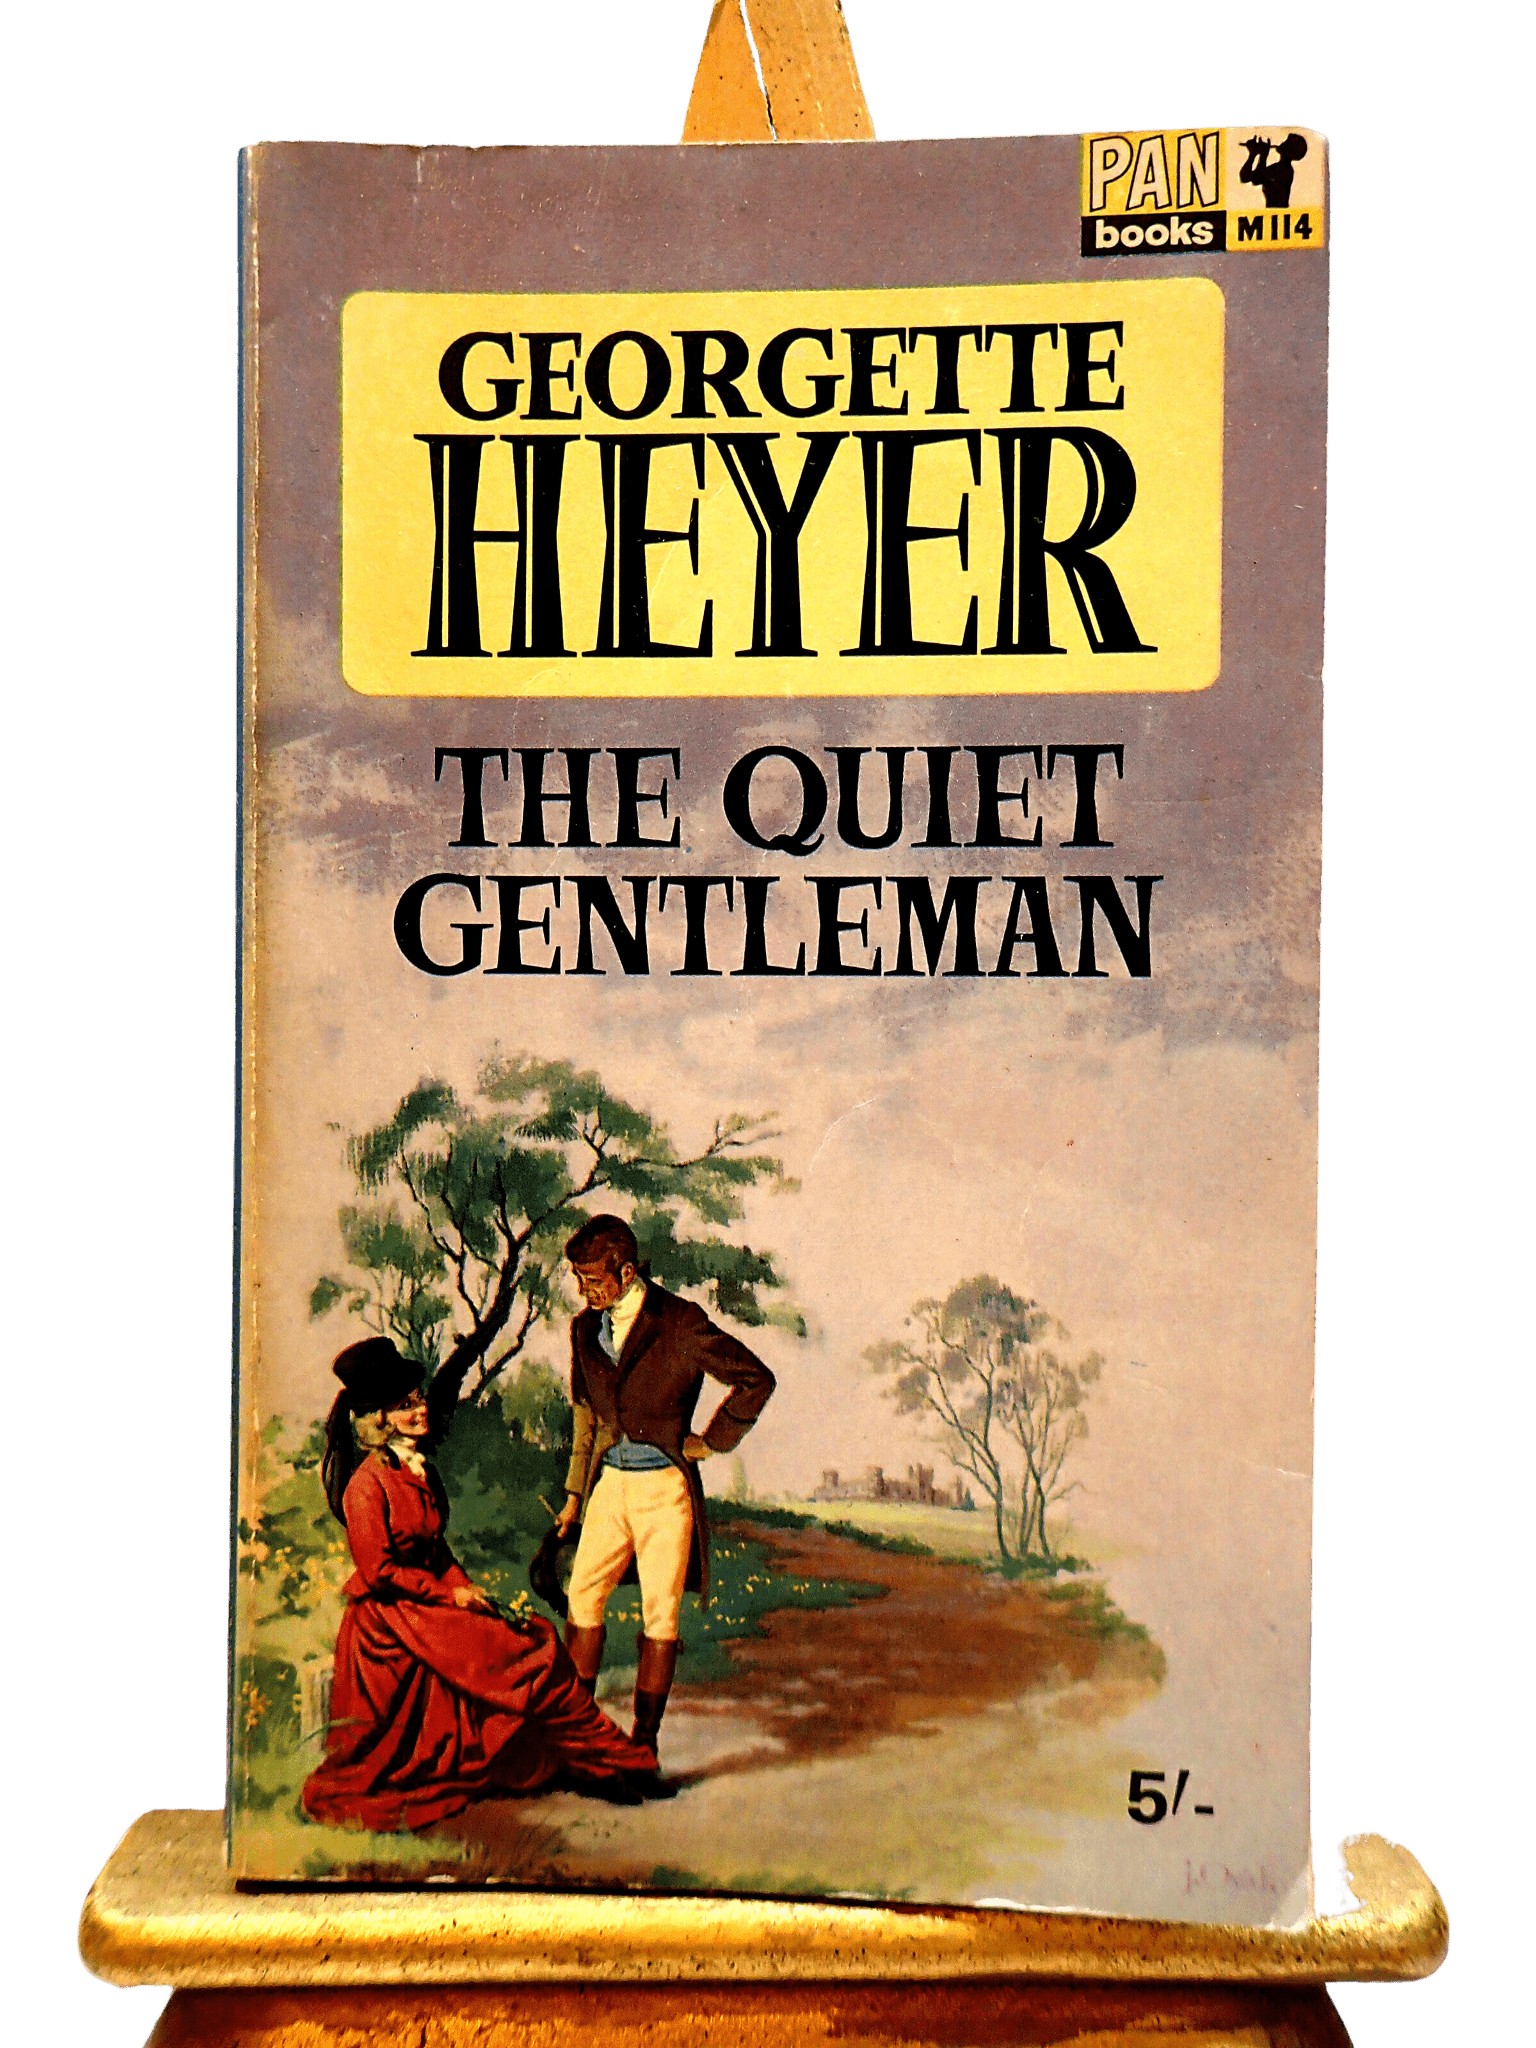 Front cover showing a lady in a Riding Habit of The Quiet Gentleman by Georgette Heyer First Edition Pan Paperback